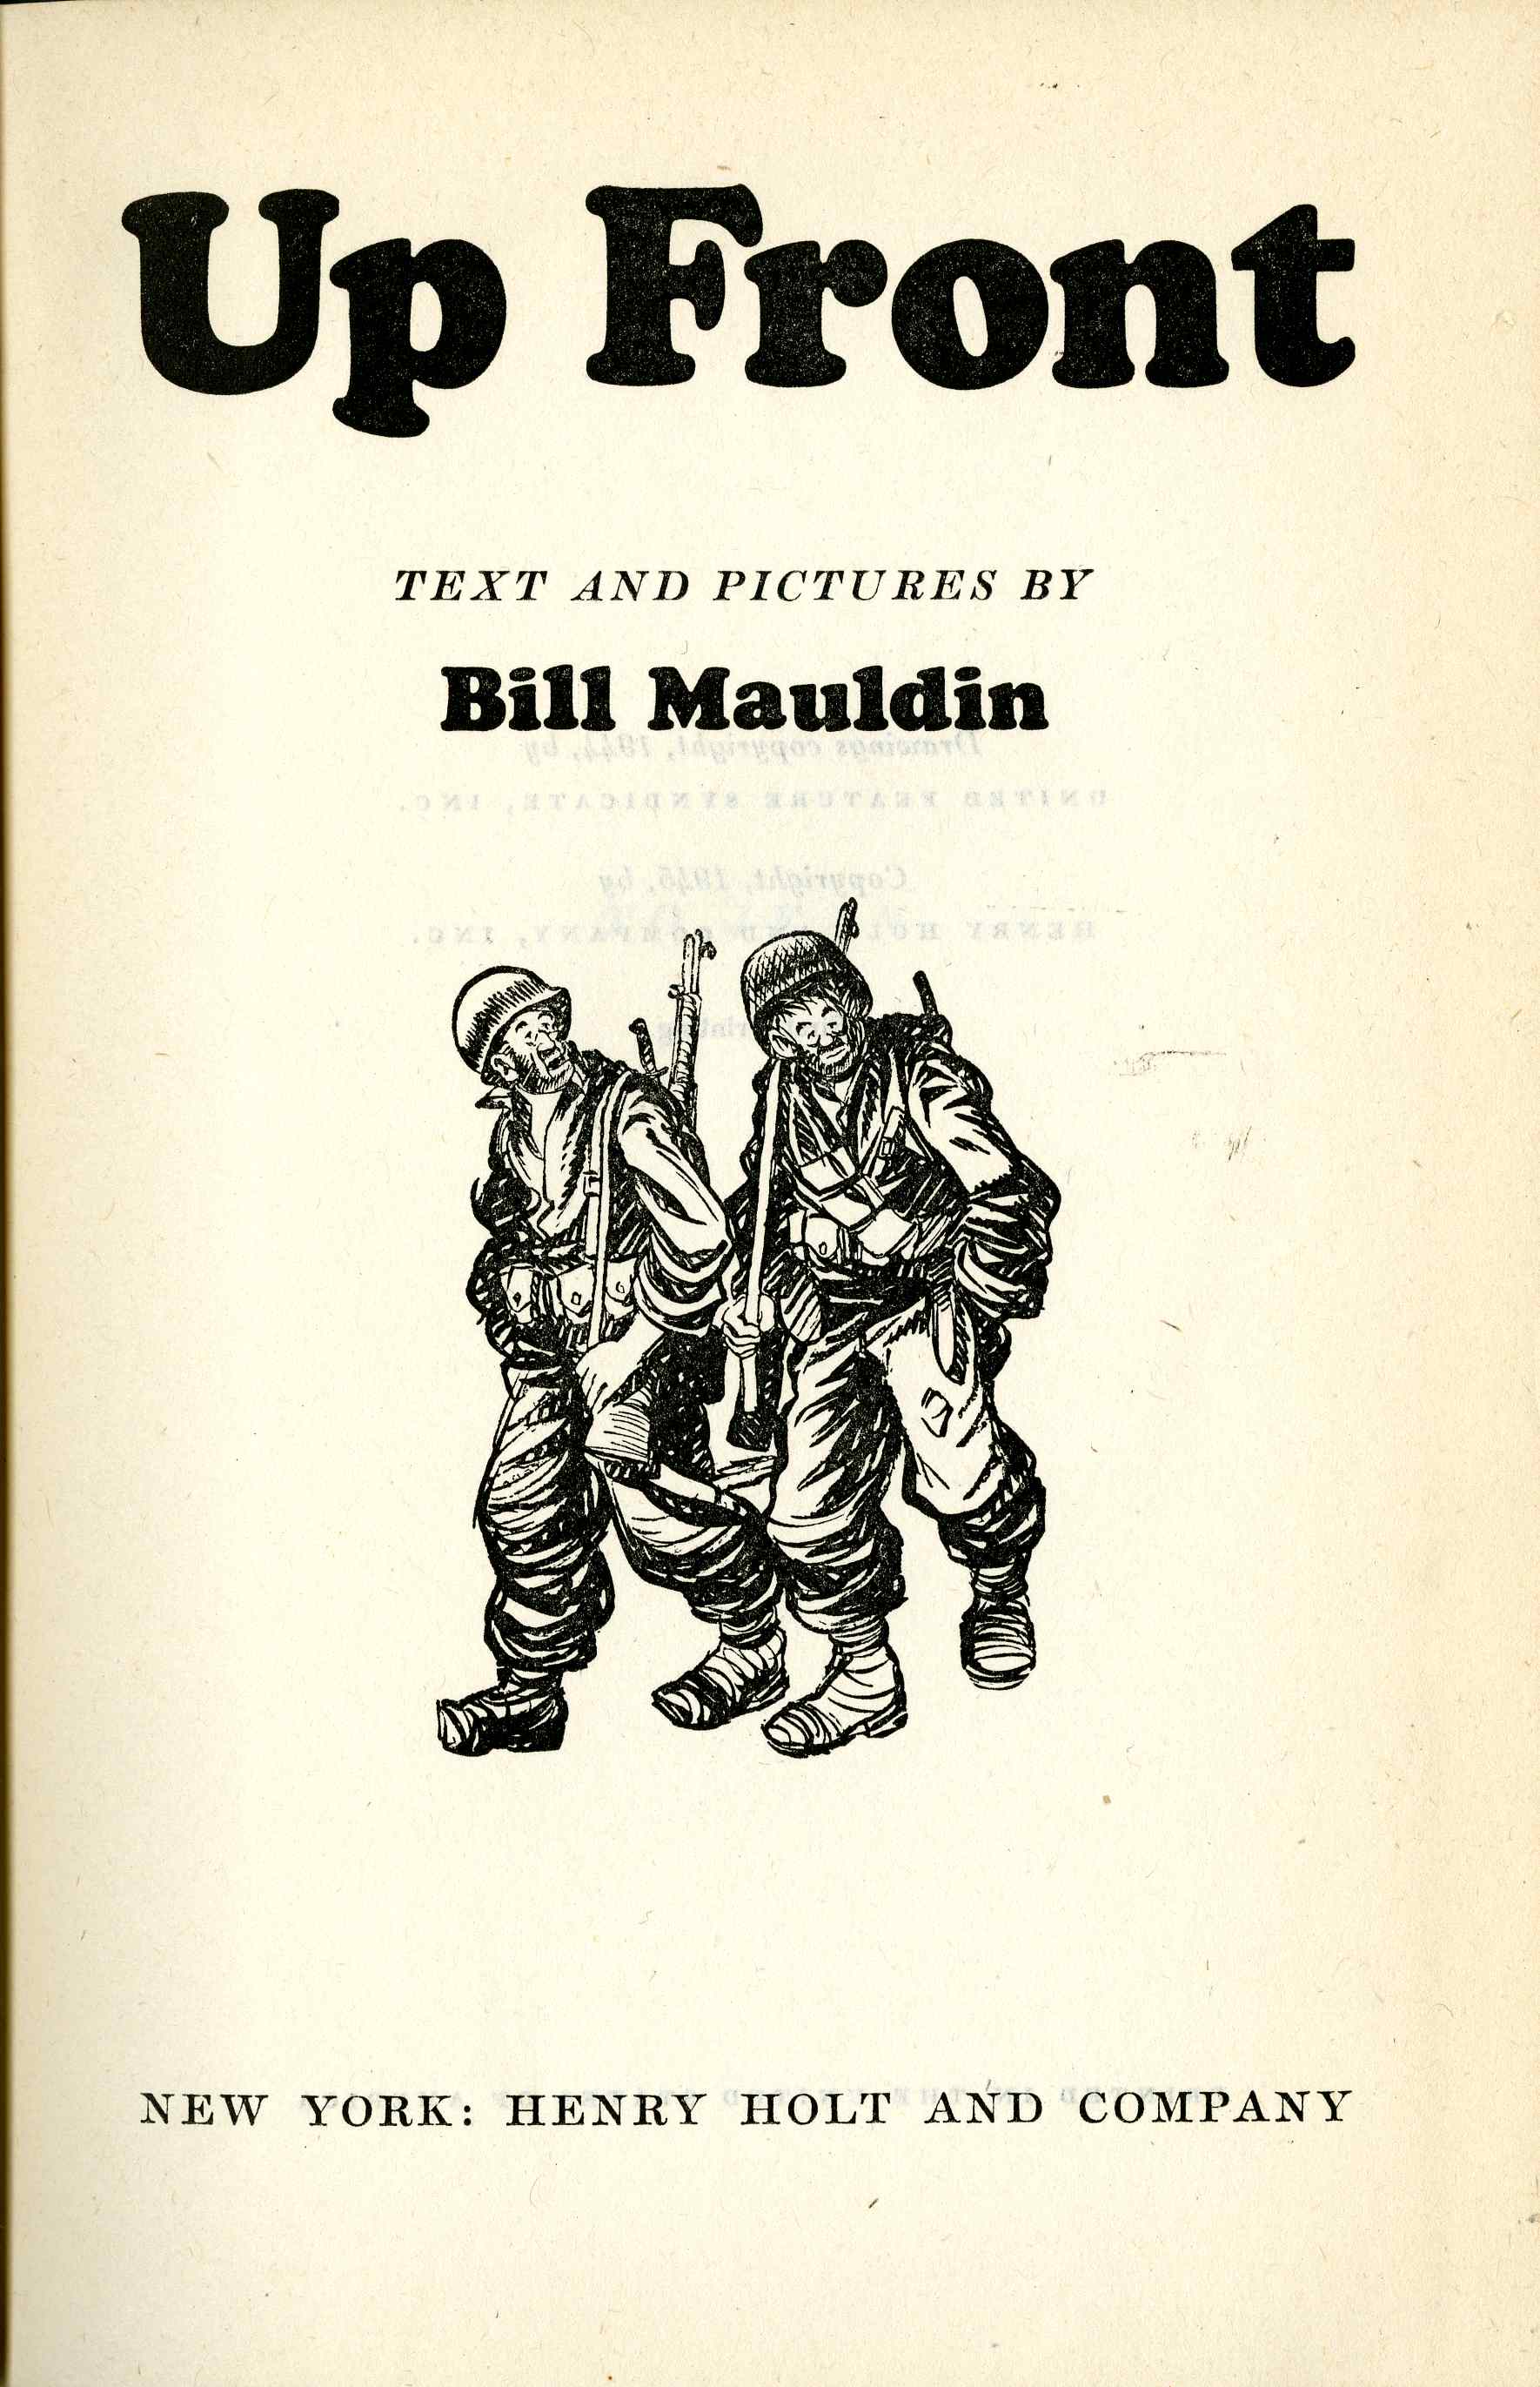 Up Front-Maudlin Book001